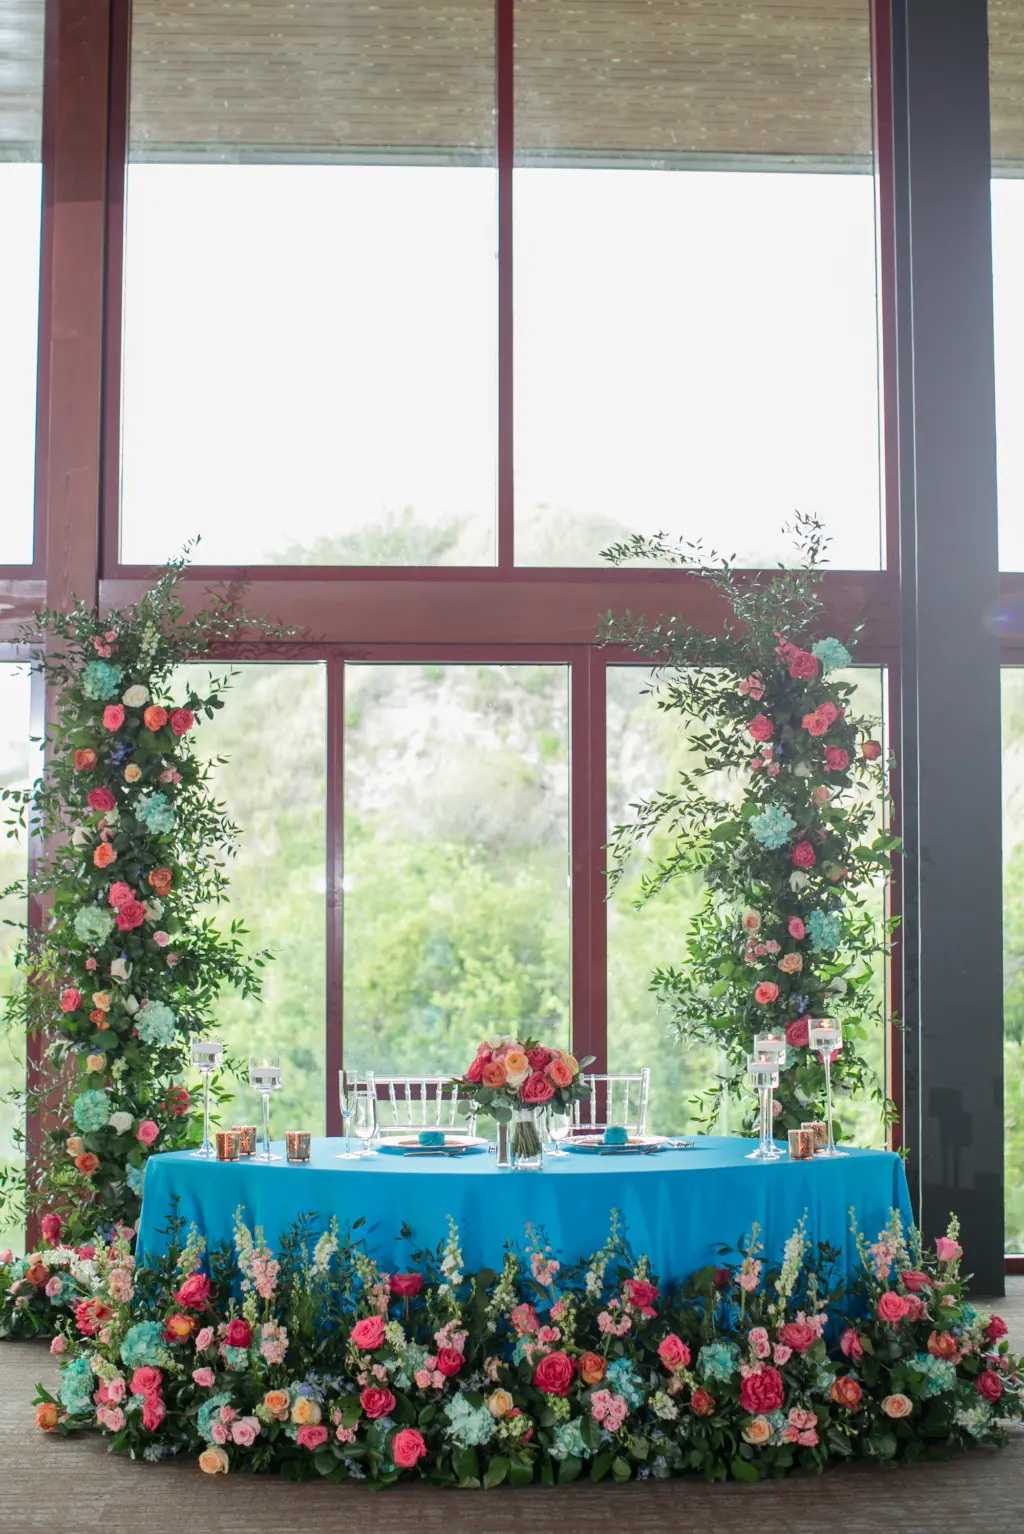 Summer Turquoise Linen Sweetheart Table Inspiration with Floral Arch and Detailing Decor | Rentals Tampa Bay A Chair Affair | Florist Tampa Monarch Events and Designs